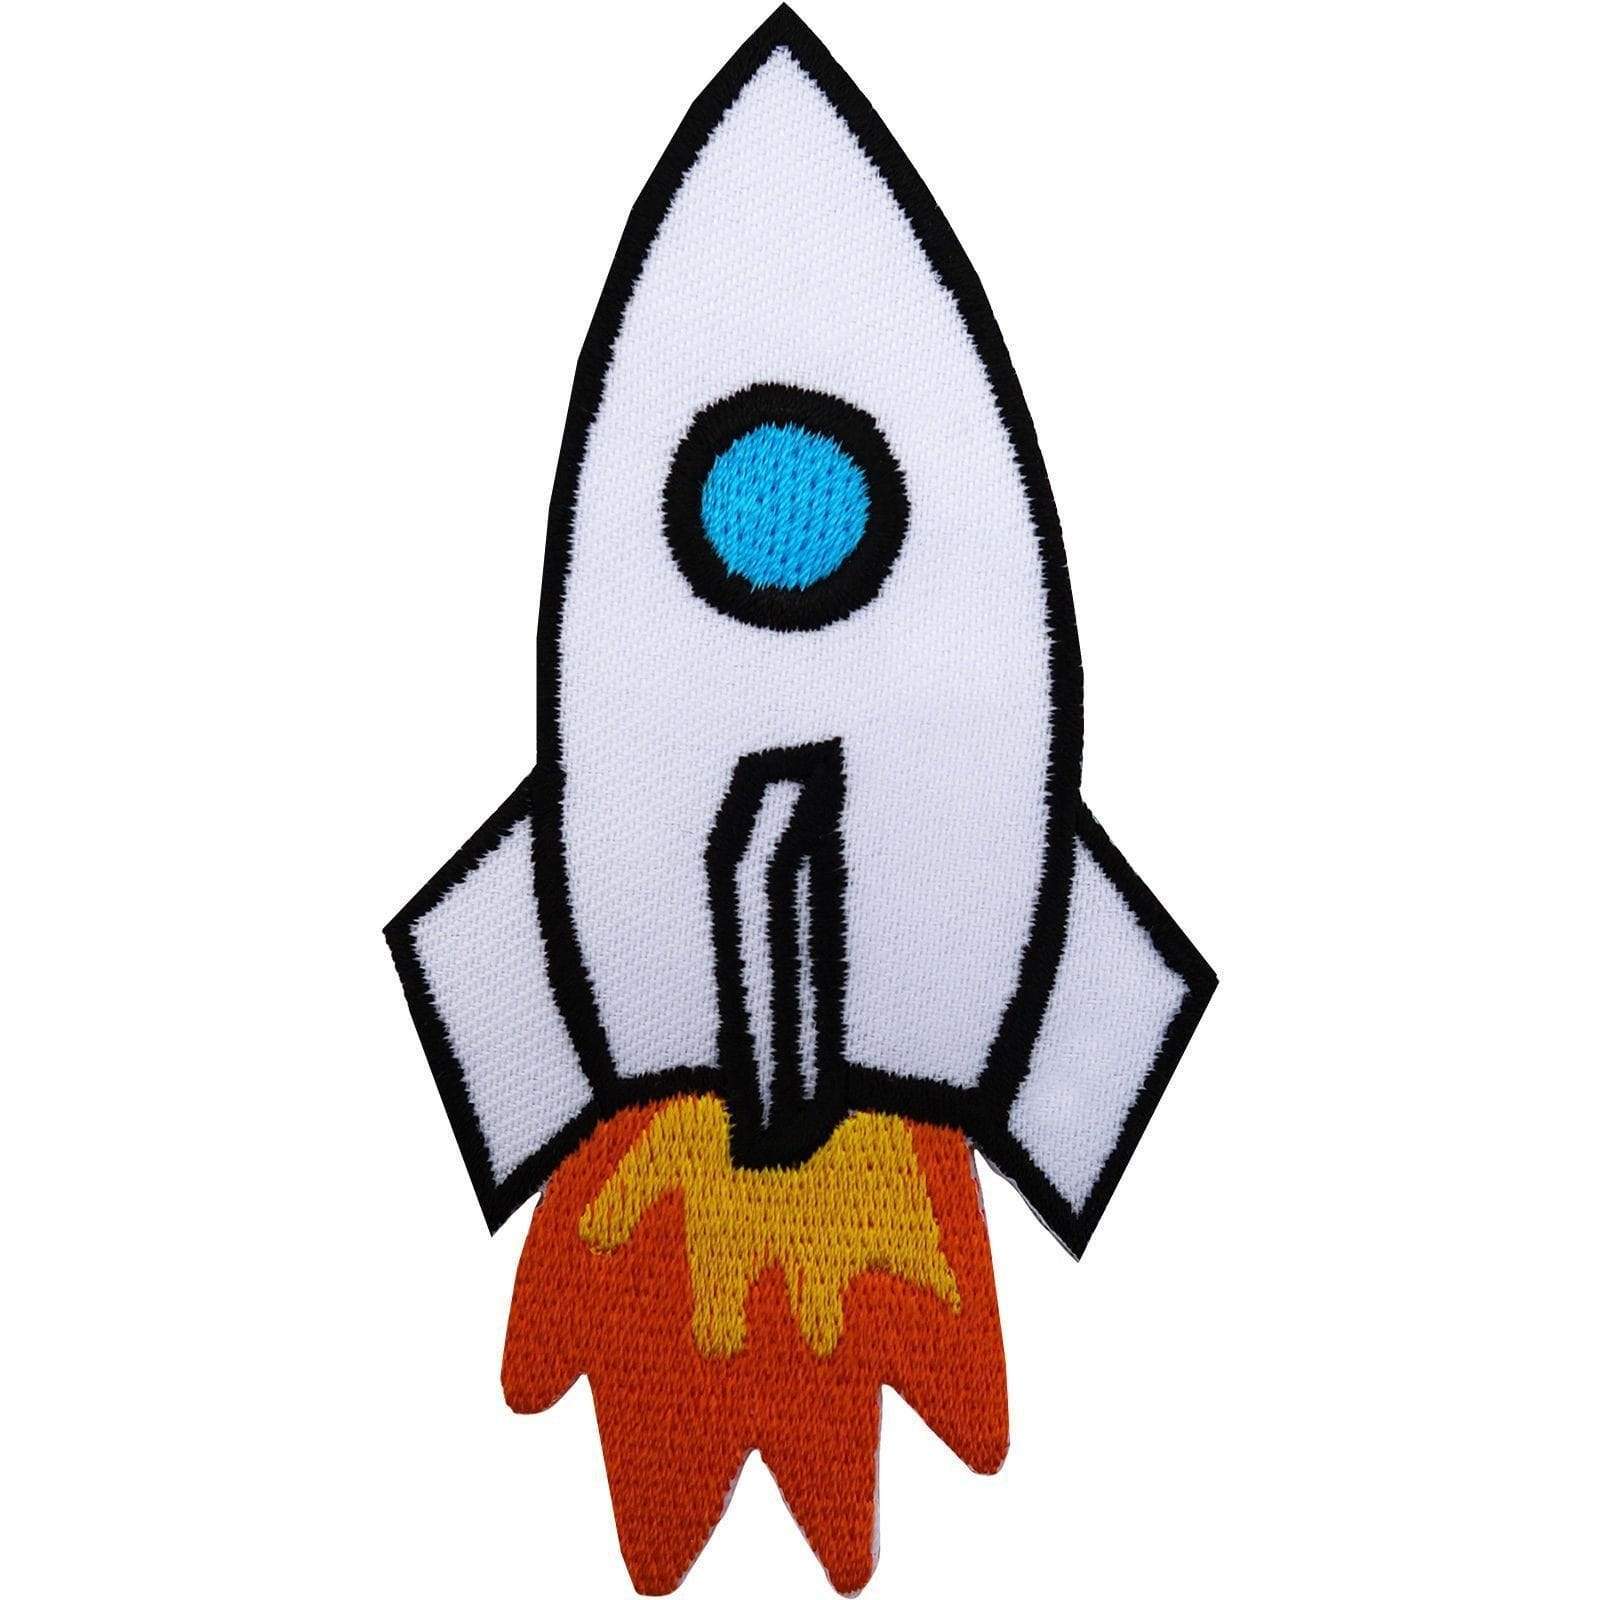 Rocket Iron On Patch Embroidered Sew On Badge Space NASA T Shirt Jacket Badge